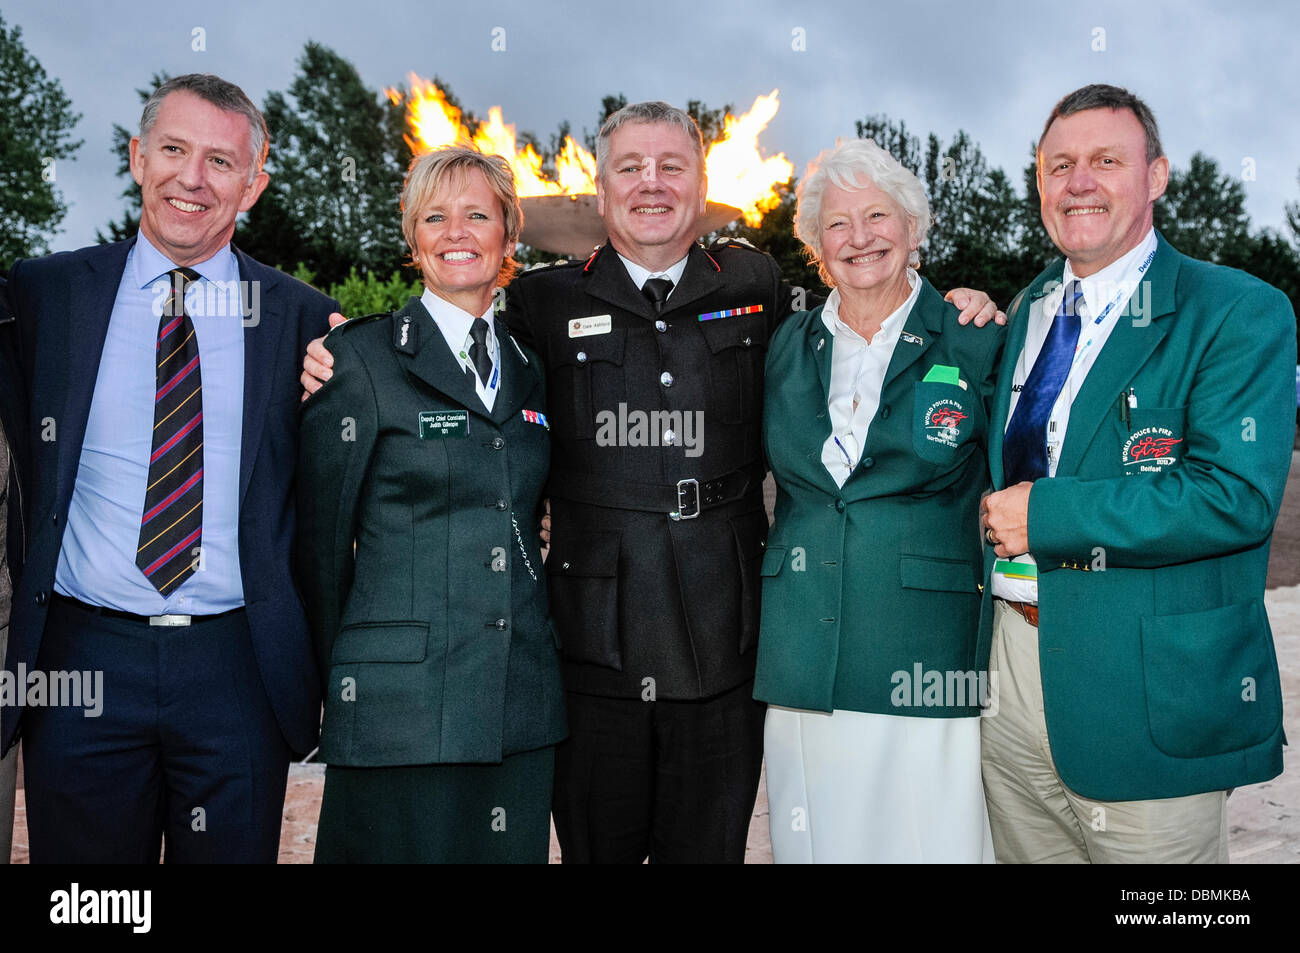 Belfast, Northern Ireland. 1st August 2013 - Members of the organising committee of the World Police and Fire Games (WPFG) at the opening ceremony including DCC Judith Gillespie, Dale Ashford from the NIFRS and Dame Mary Peters Credit:  Stephen Barnes/Alamy Live News Stock Photo